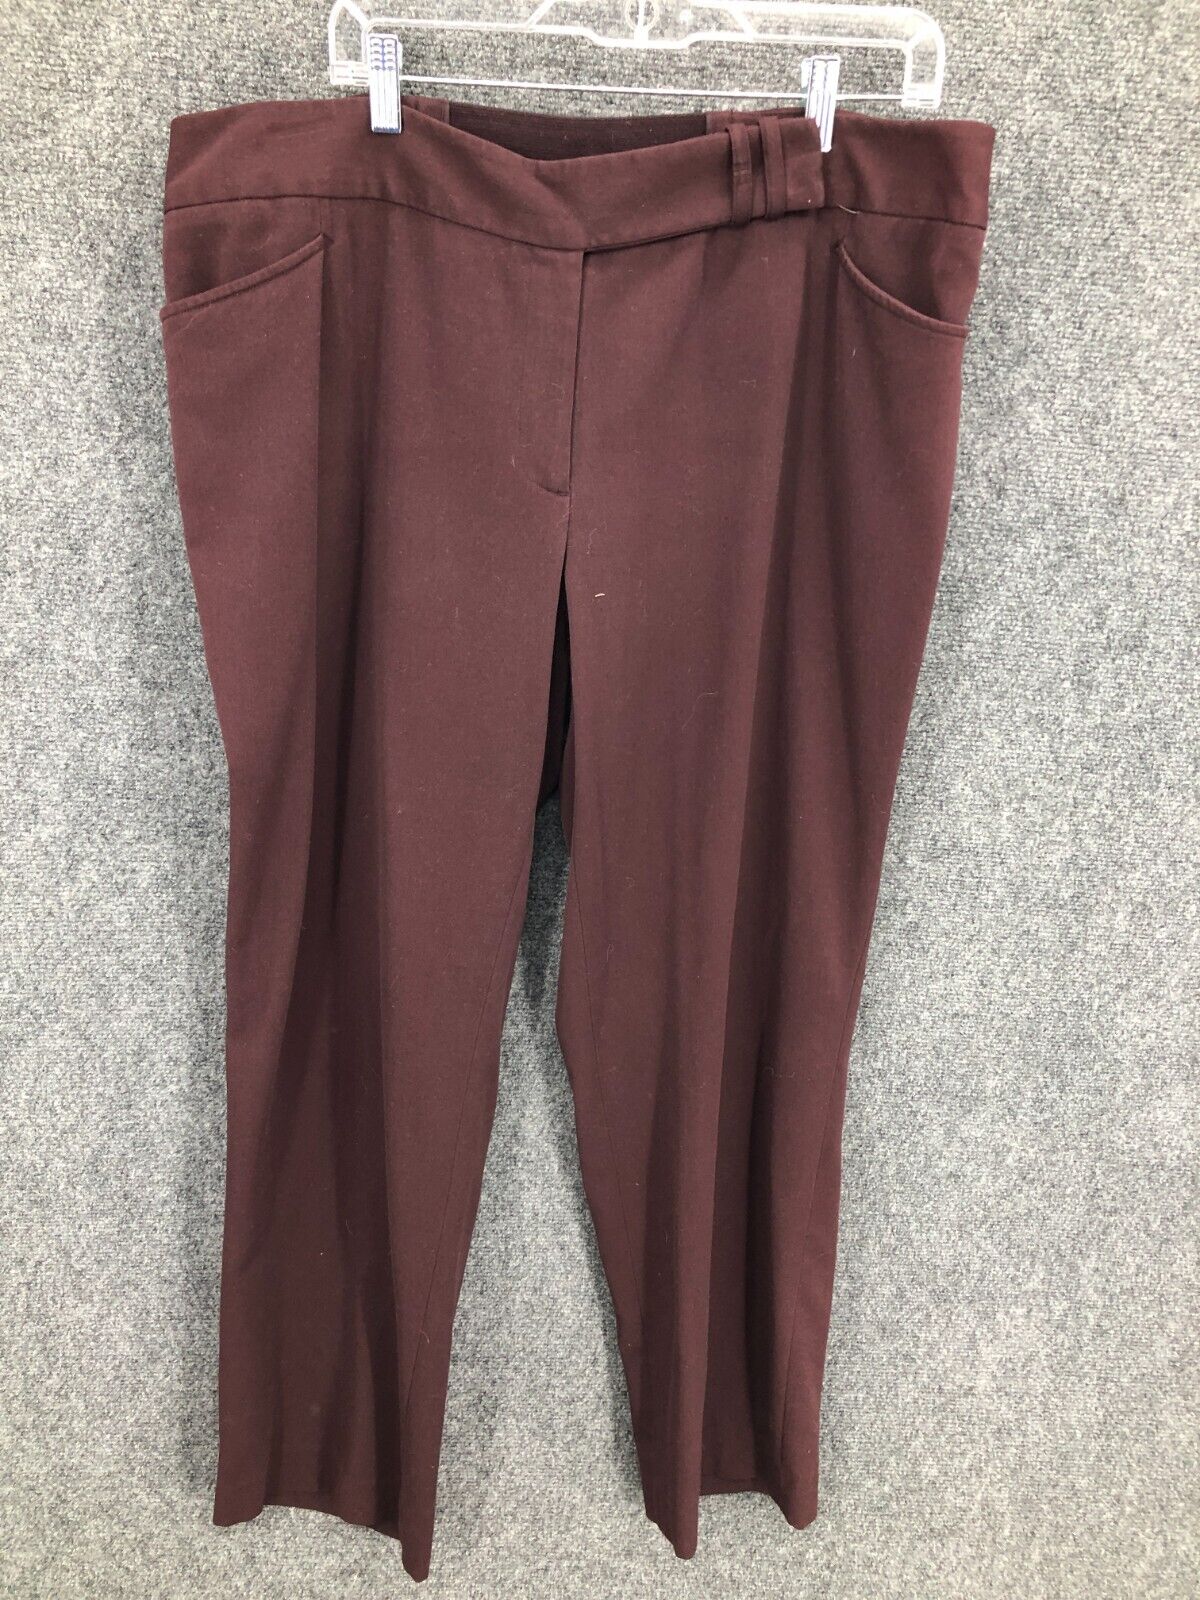 Lane Bryant Pants Womens 18 Maroon Flat Front Pull On Dress Trousers